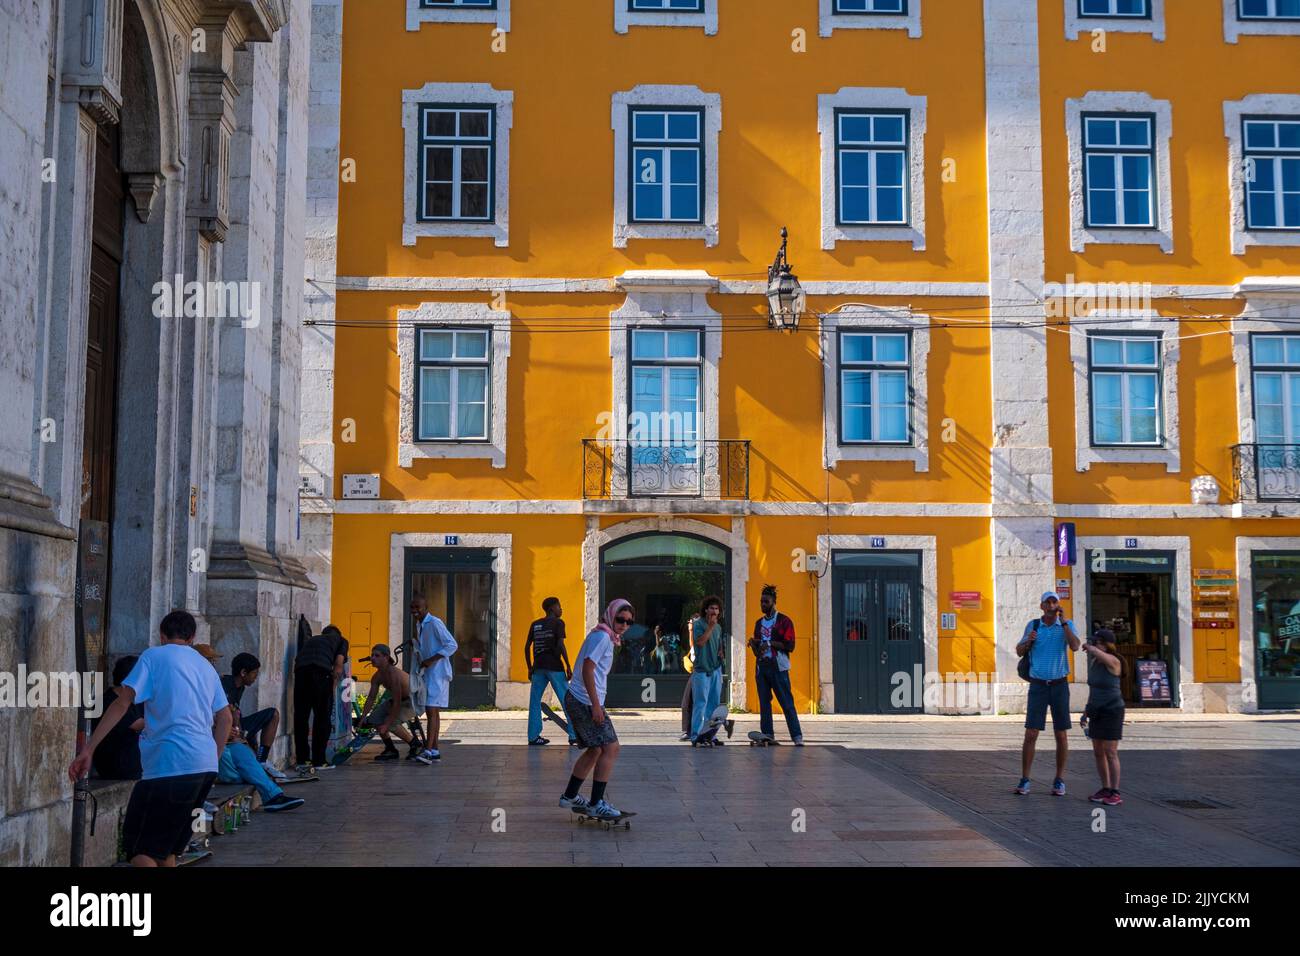 Skateboarders in a square in the historic center of Lisbon, Portugal Stock Photo